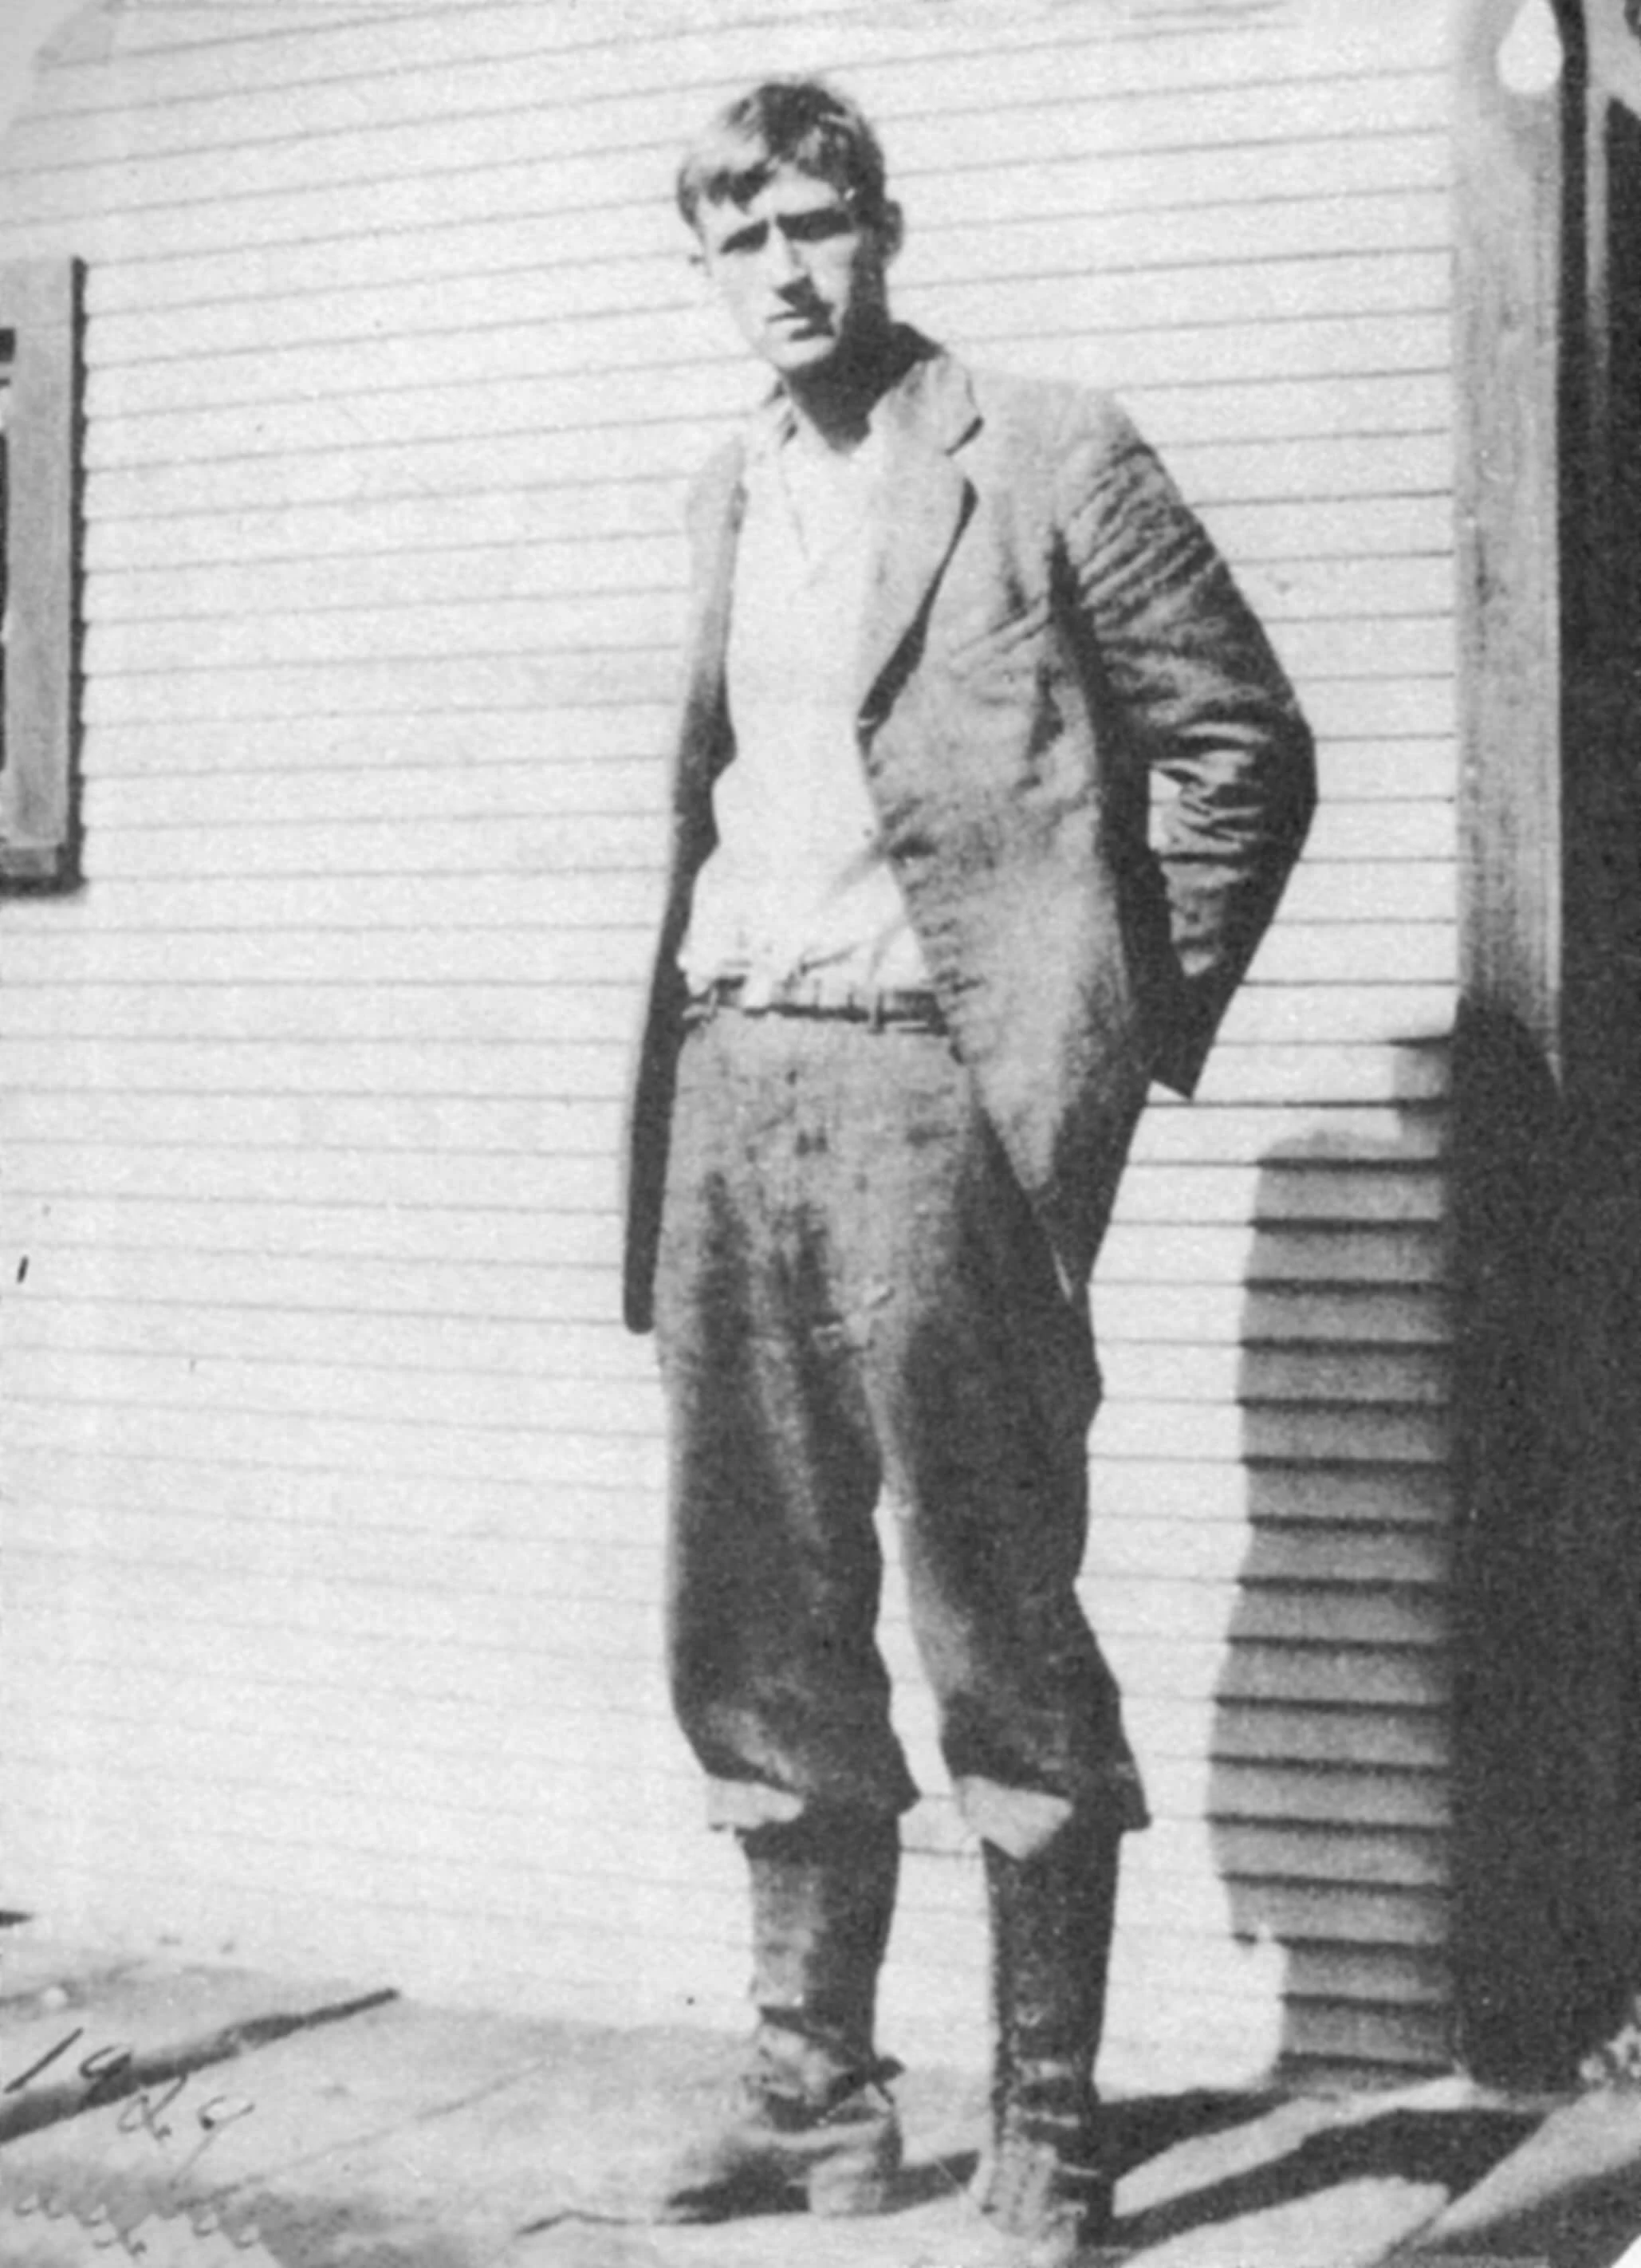 Black and white photo of a young man in a tired looking suit and boots. He is standing, looking at the camera with a straight face, one hand in his back pocket. His clothes look too big.